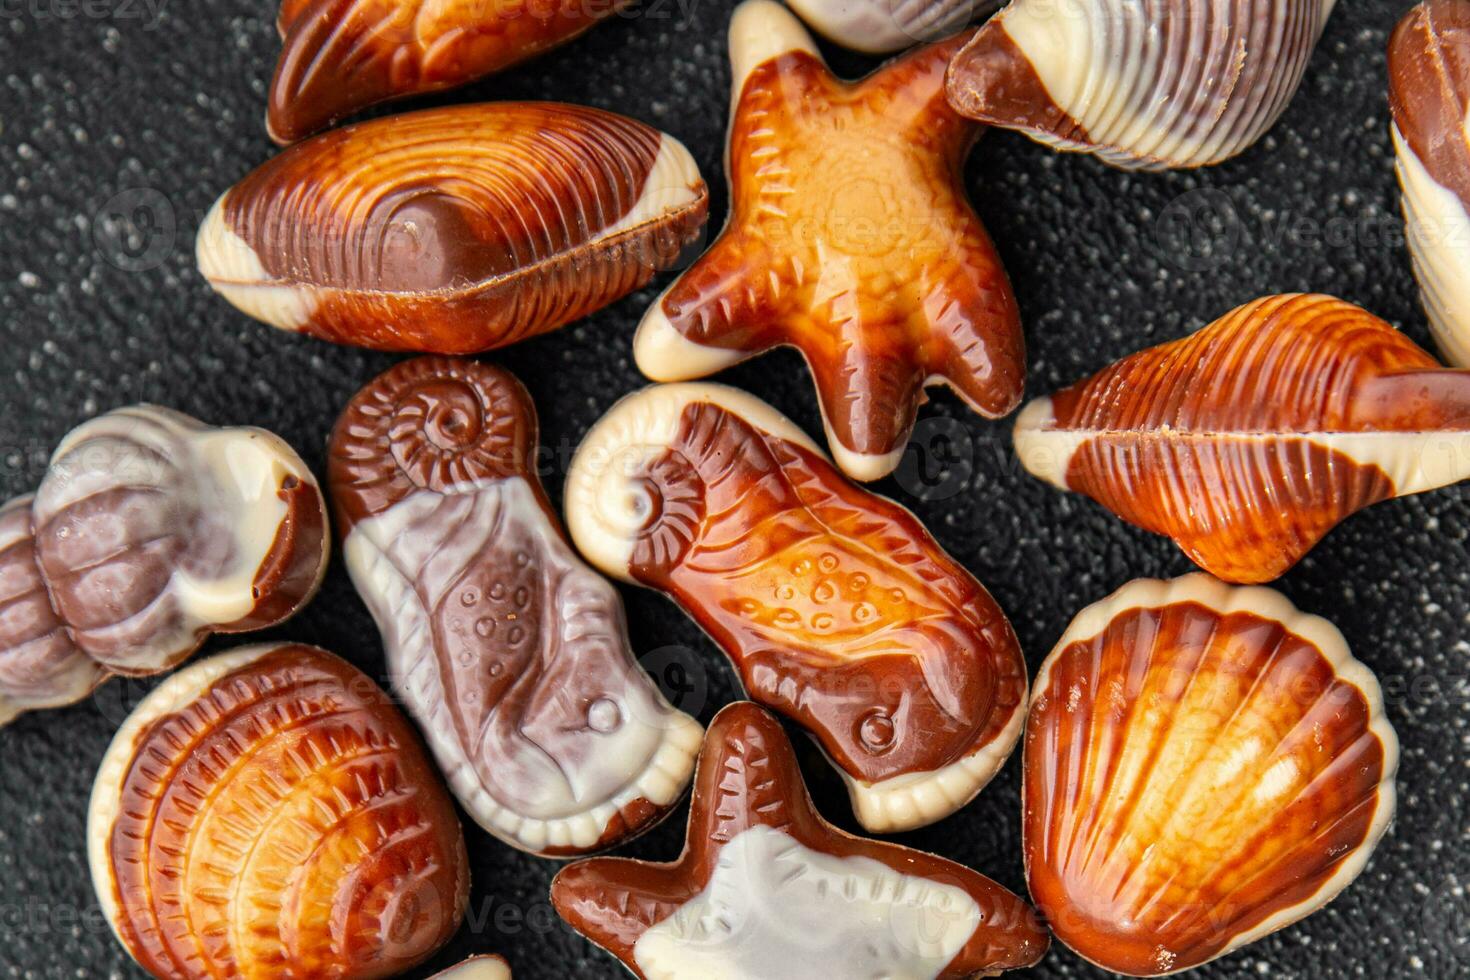 candy seashells delicious chocolate sweet dessert delicious healthy eating cooking appetizer meal food snack on the table photo